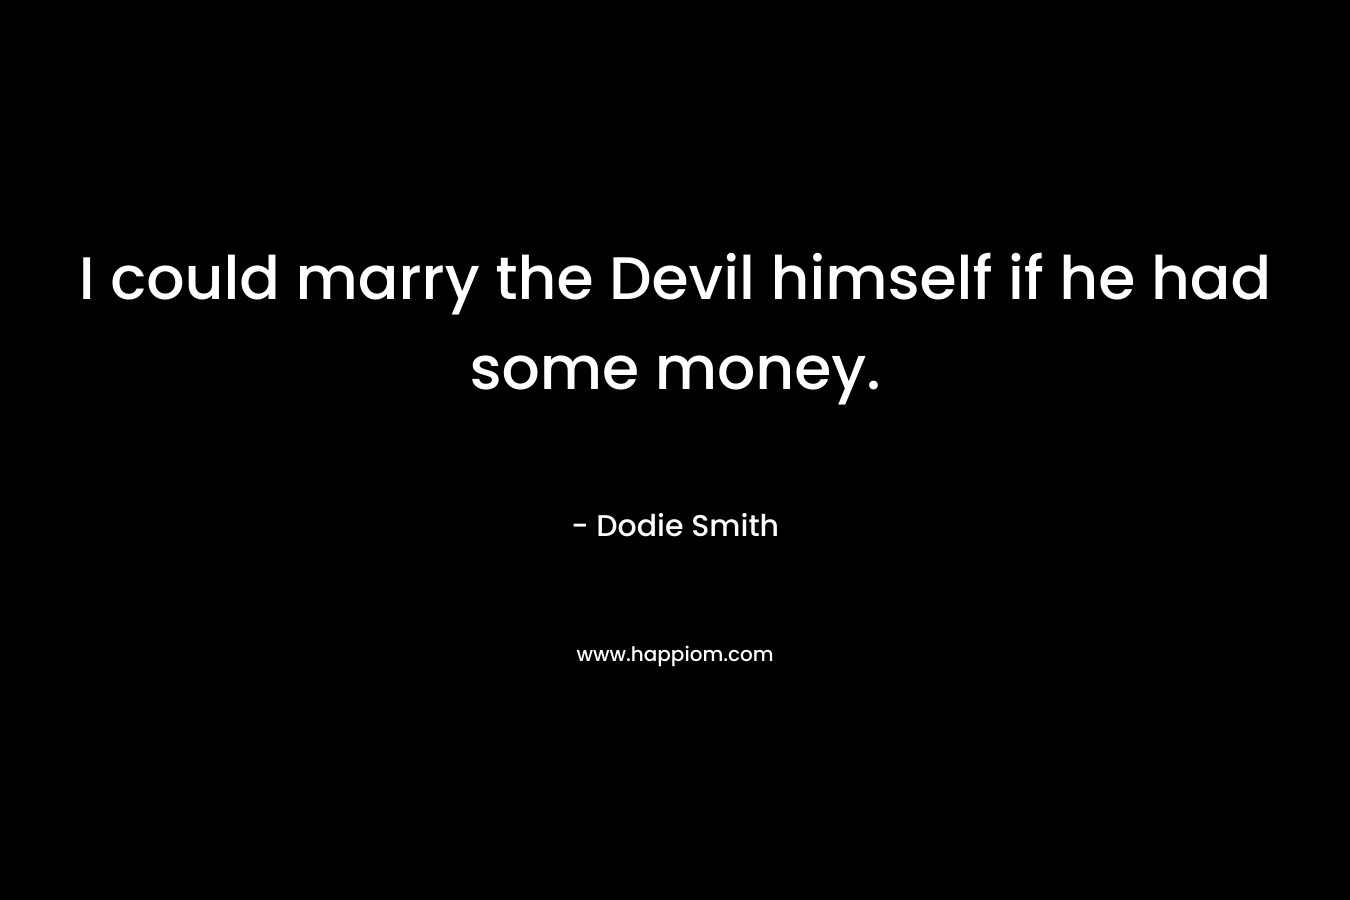 I could marry the Devil himself if he had some money. – Dodie Smith